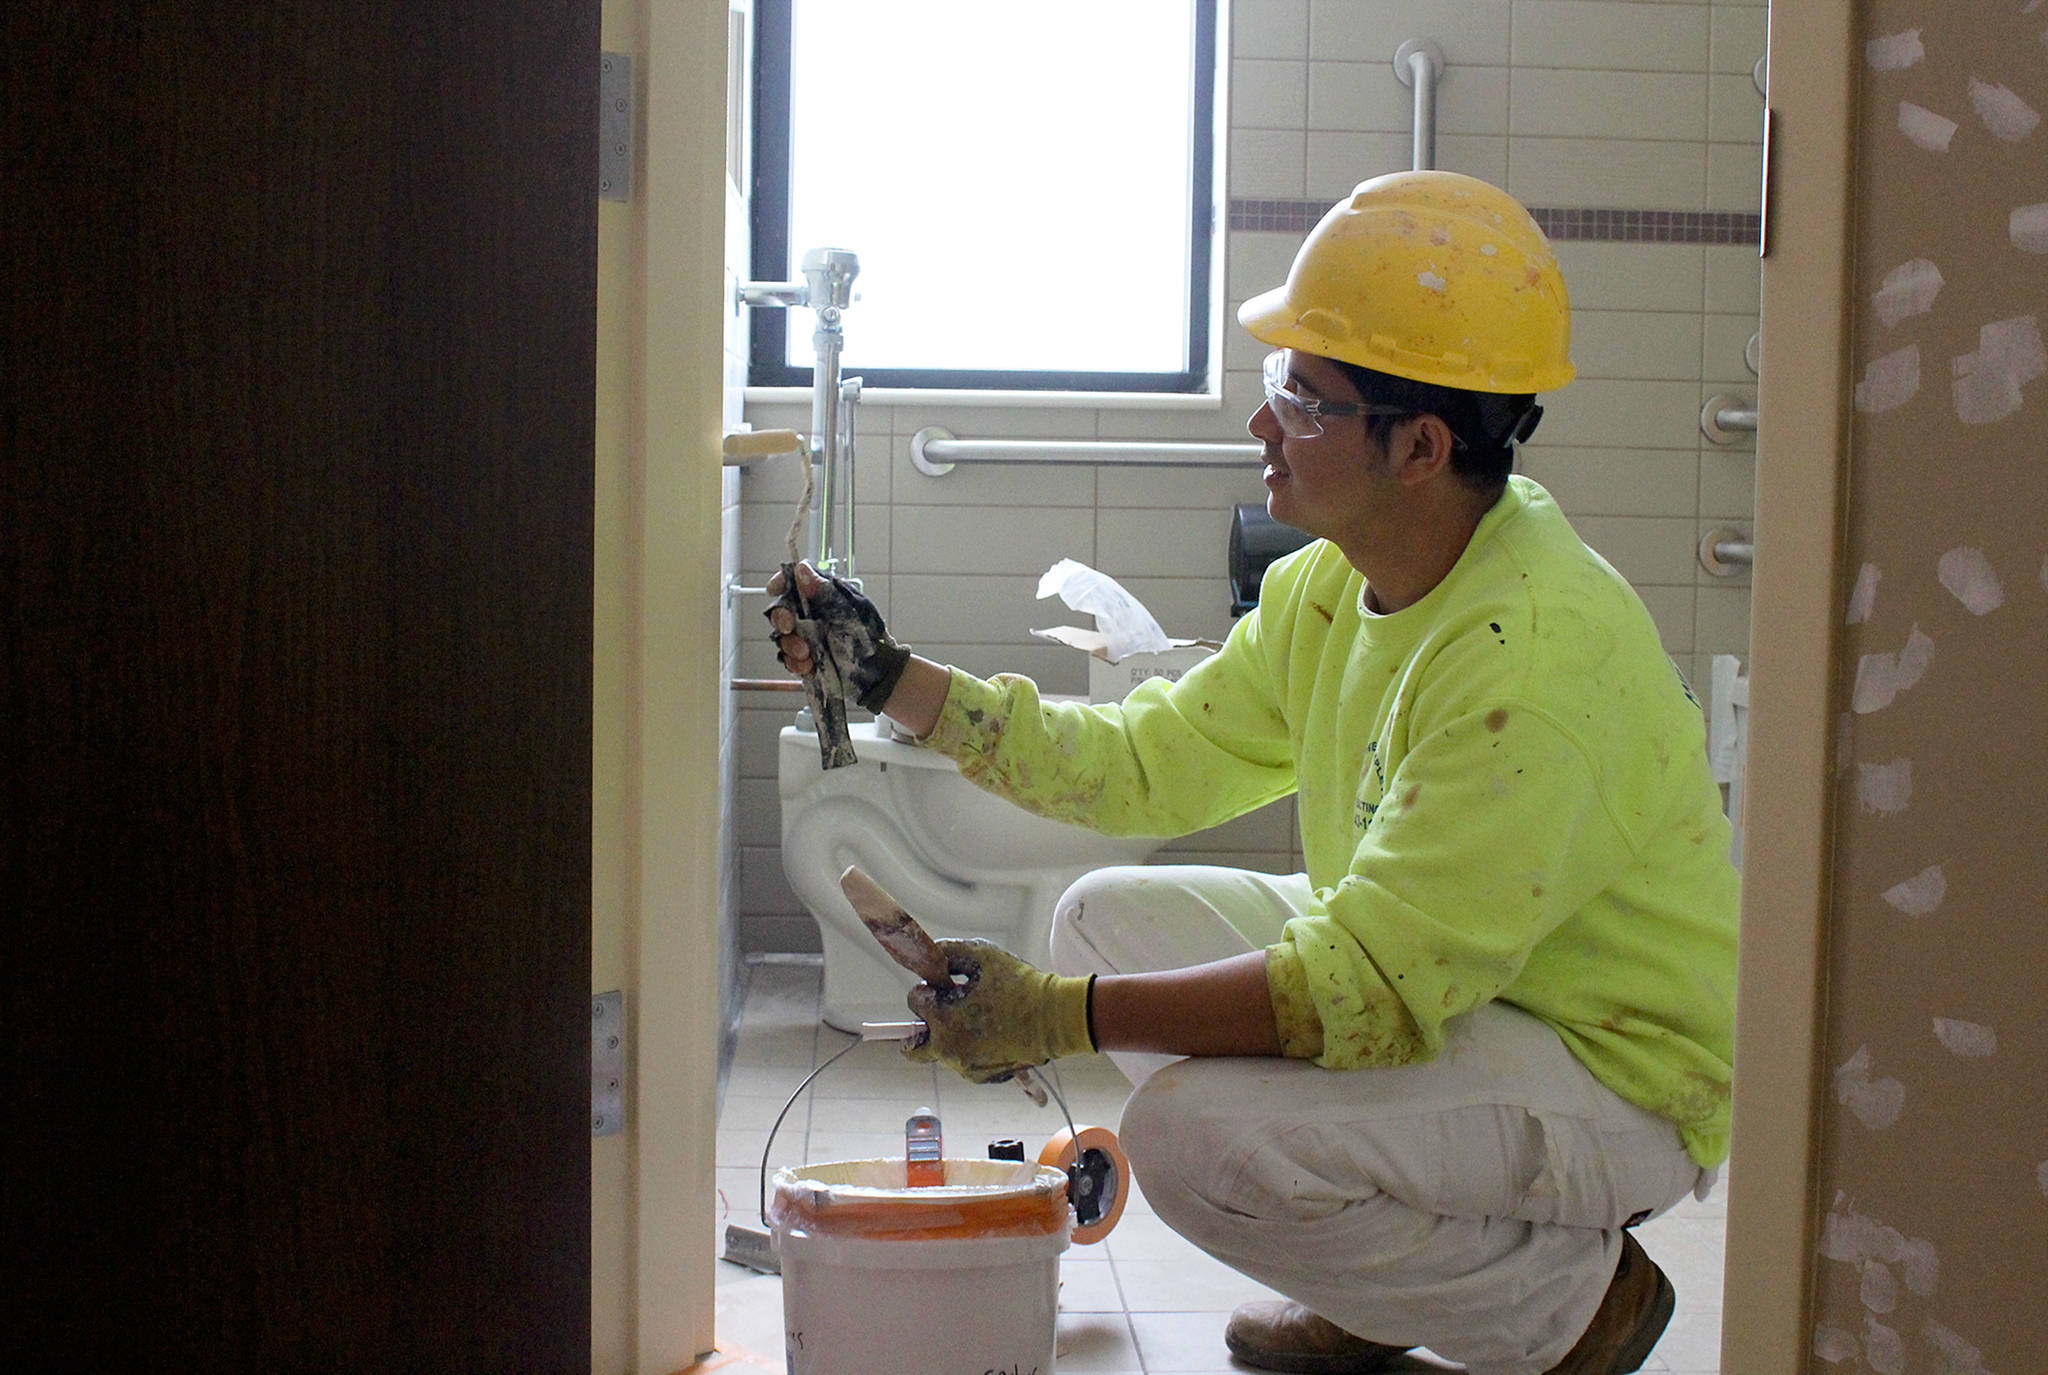 Working on the finishing touches of a patient room inside the new wing of WhidbeyHealth Medical Center, Carlos Torres paints a bathroom door. The 39-room wing is slated to open July 7. Photo by Patricia Guthrie/Whidbey News-Times